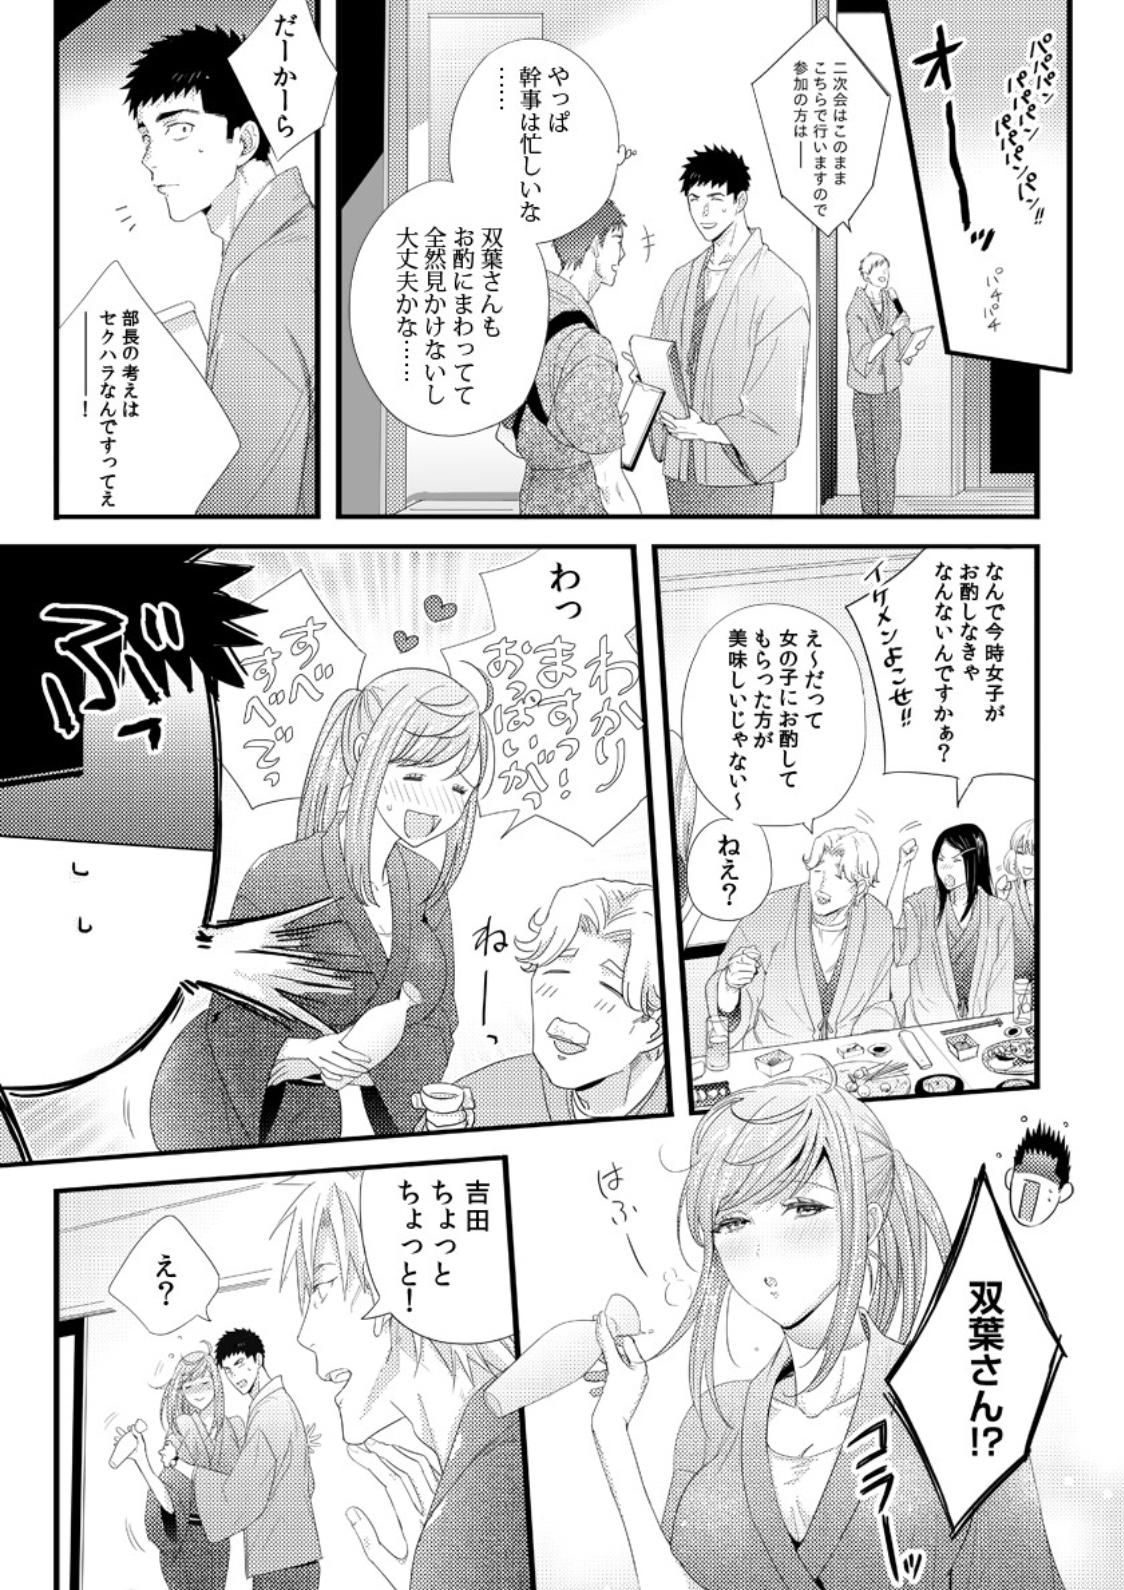 Please Let Me Hold You Futaba-San! Ch. 1-4 10